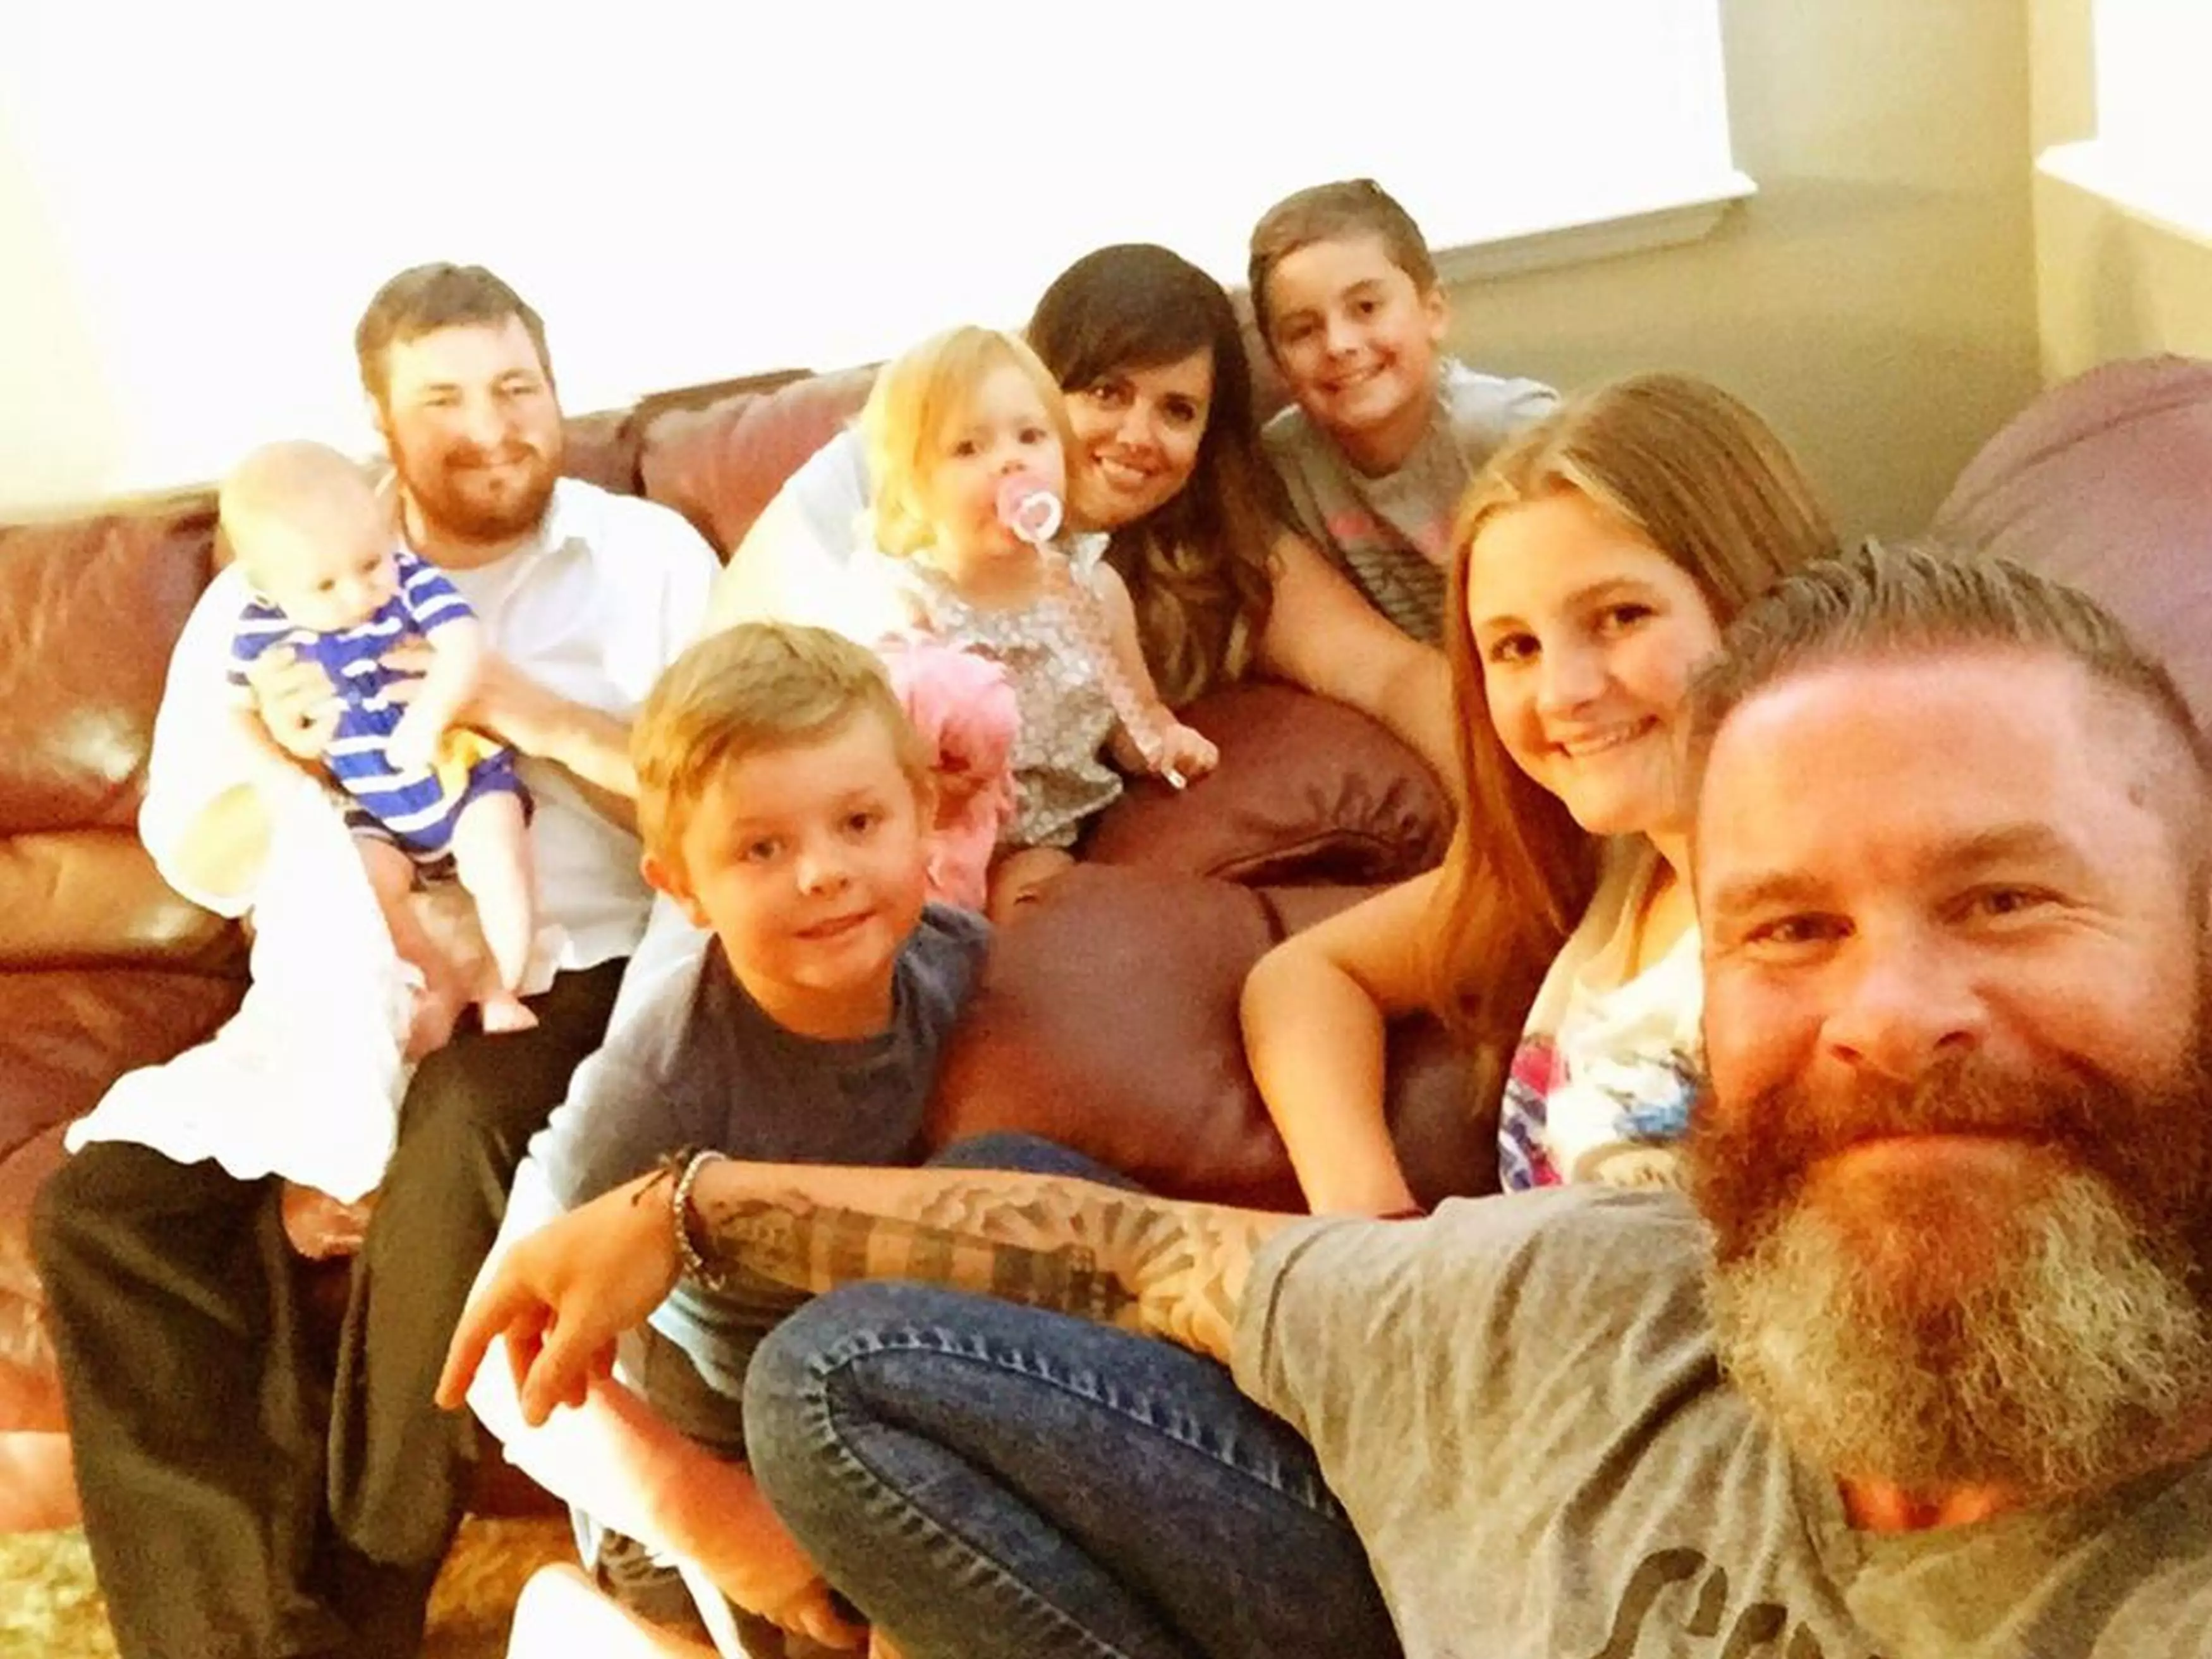 A dad-of-three shared an emotional post about him and his ex-wife's new husband becoming pals (